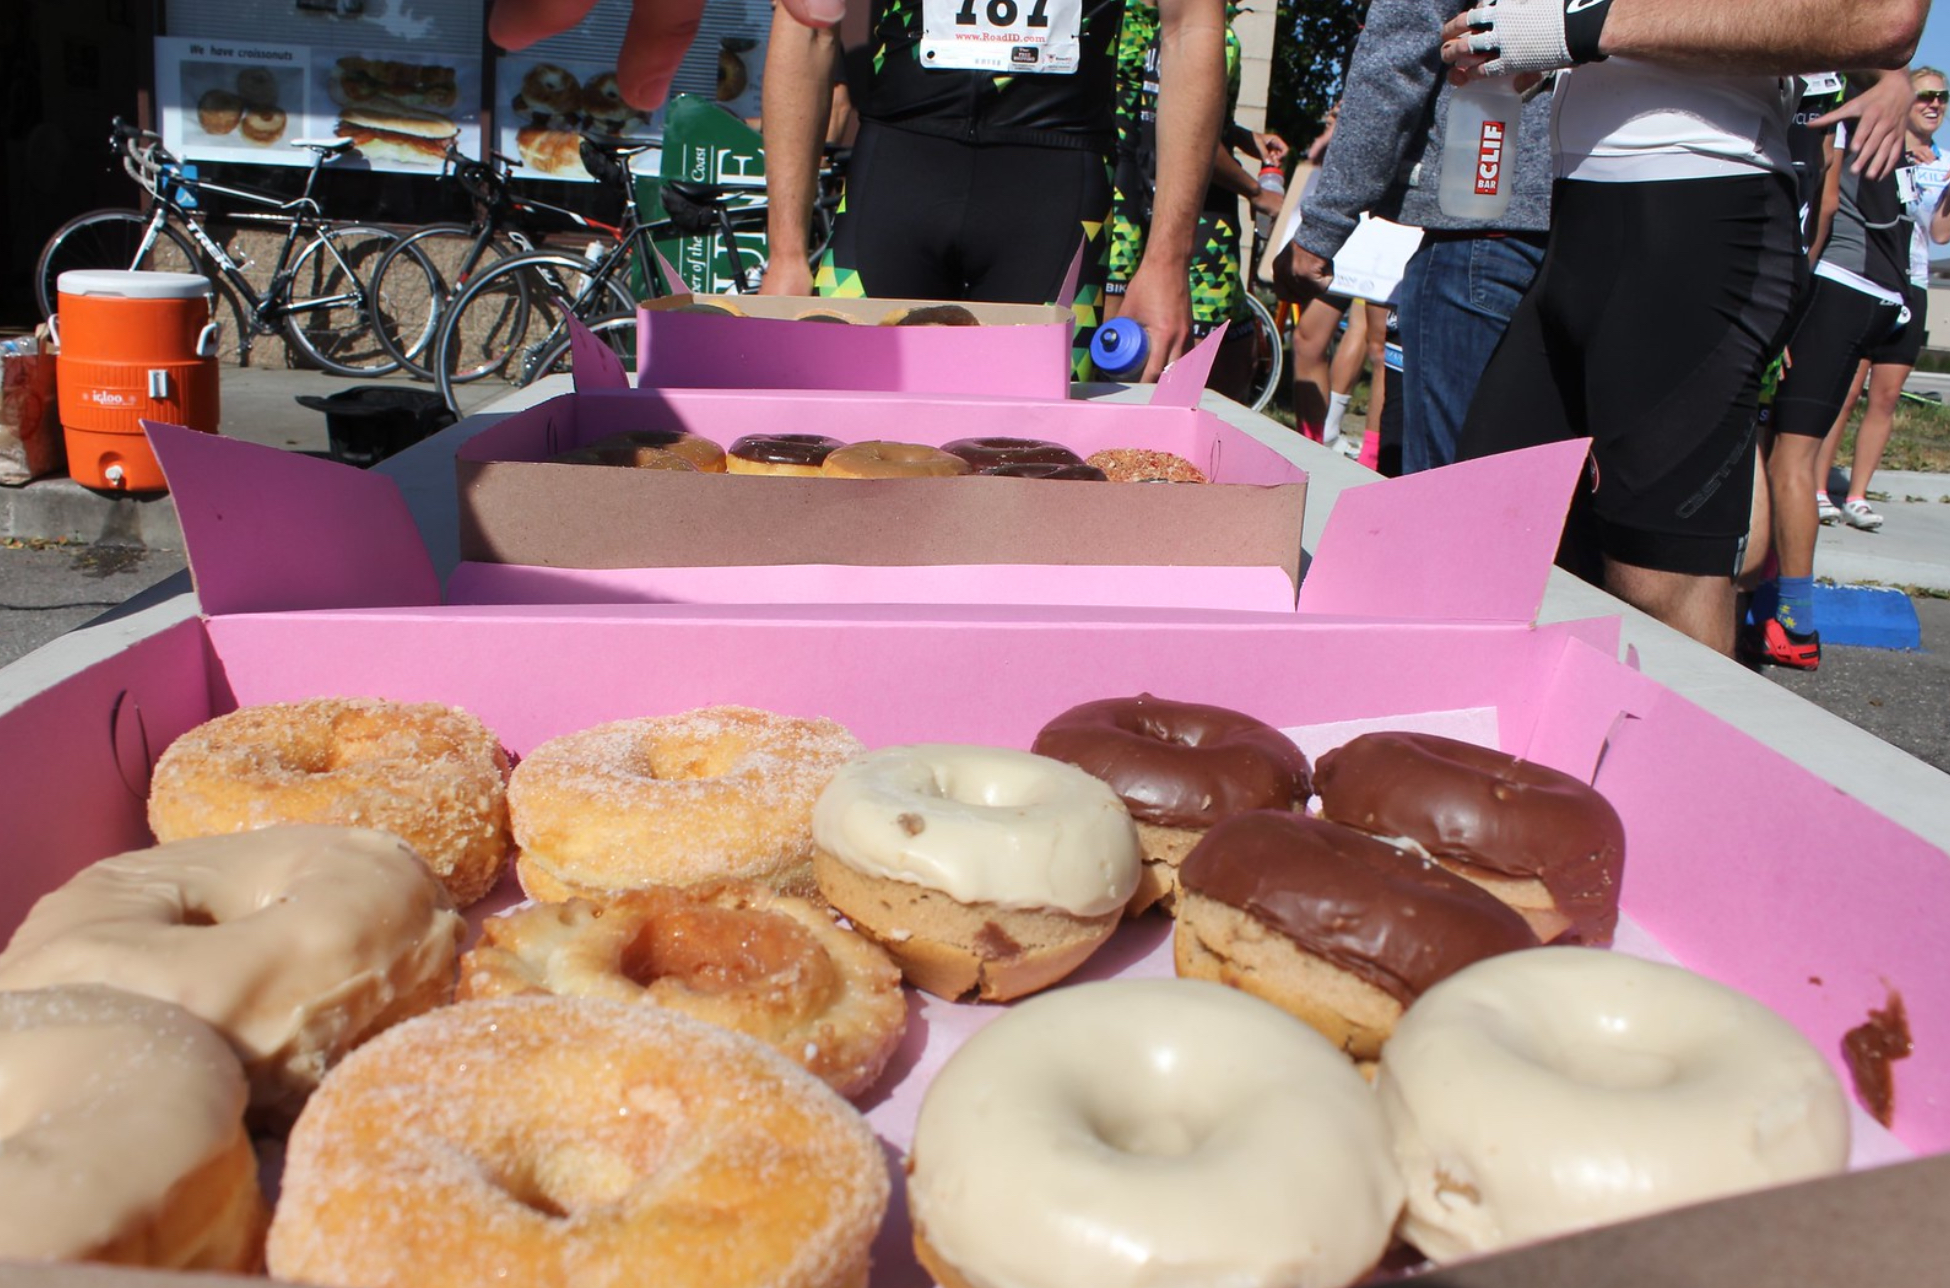 POWERED BY 24 DONUTS YASIR SALEM EARNS SWEET VICTORY AT TOUR DE DONUT